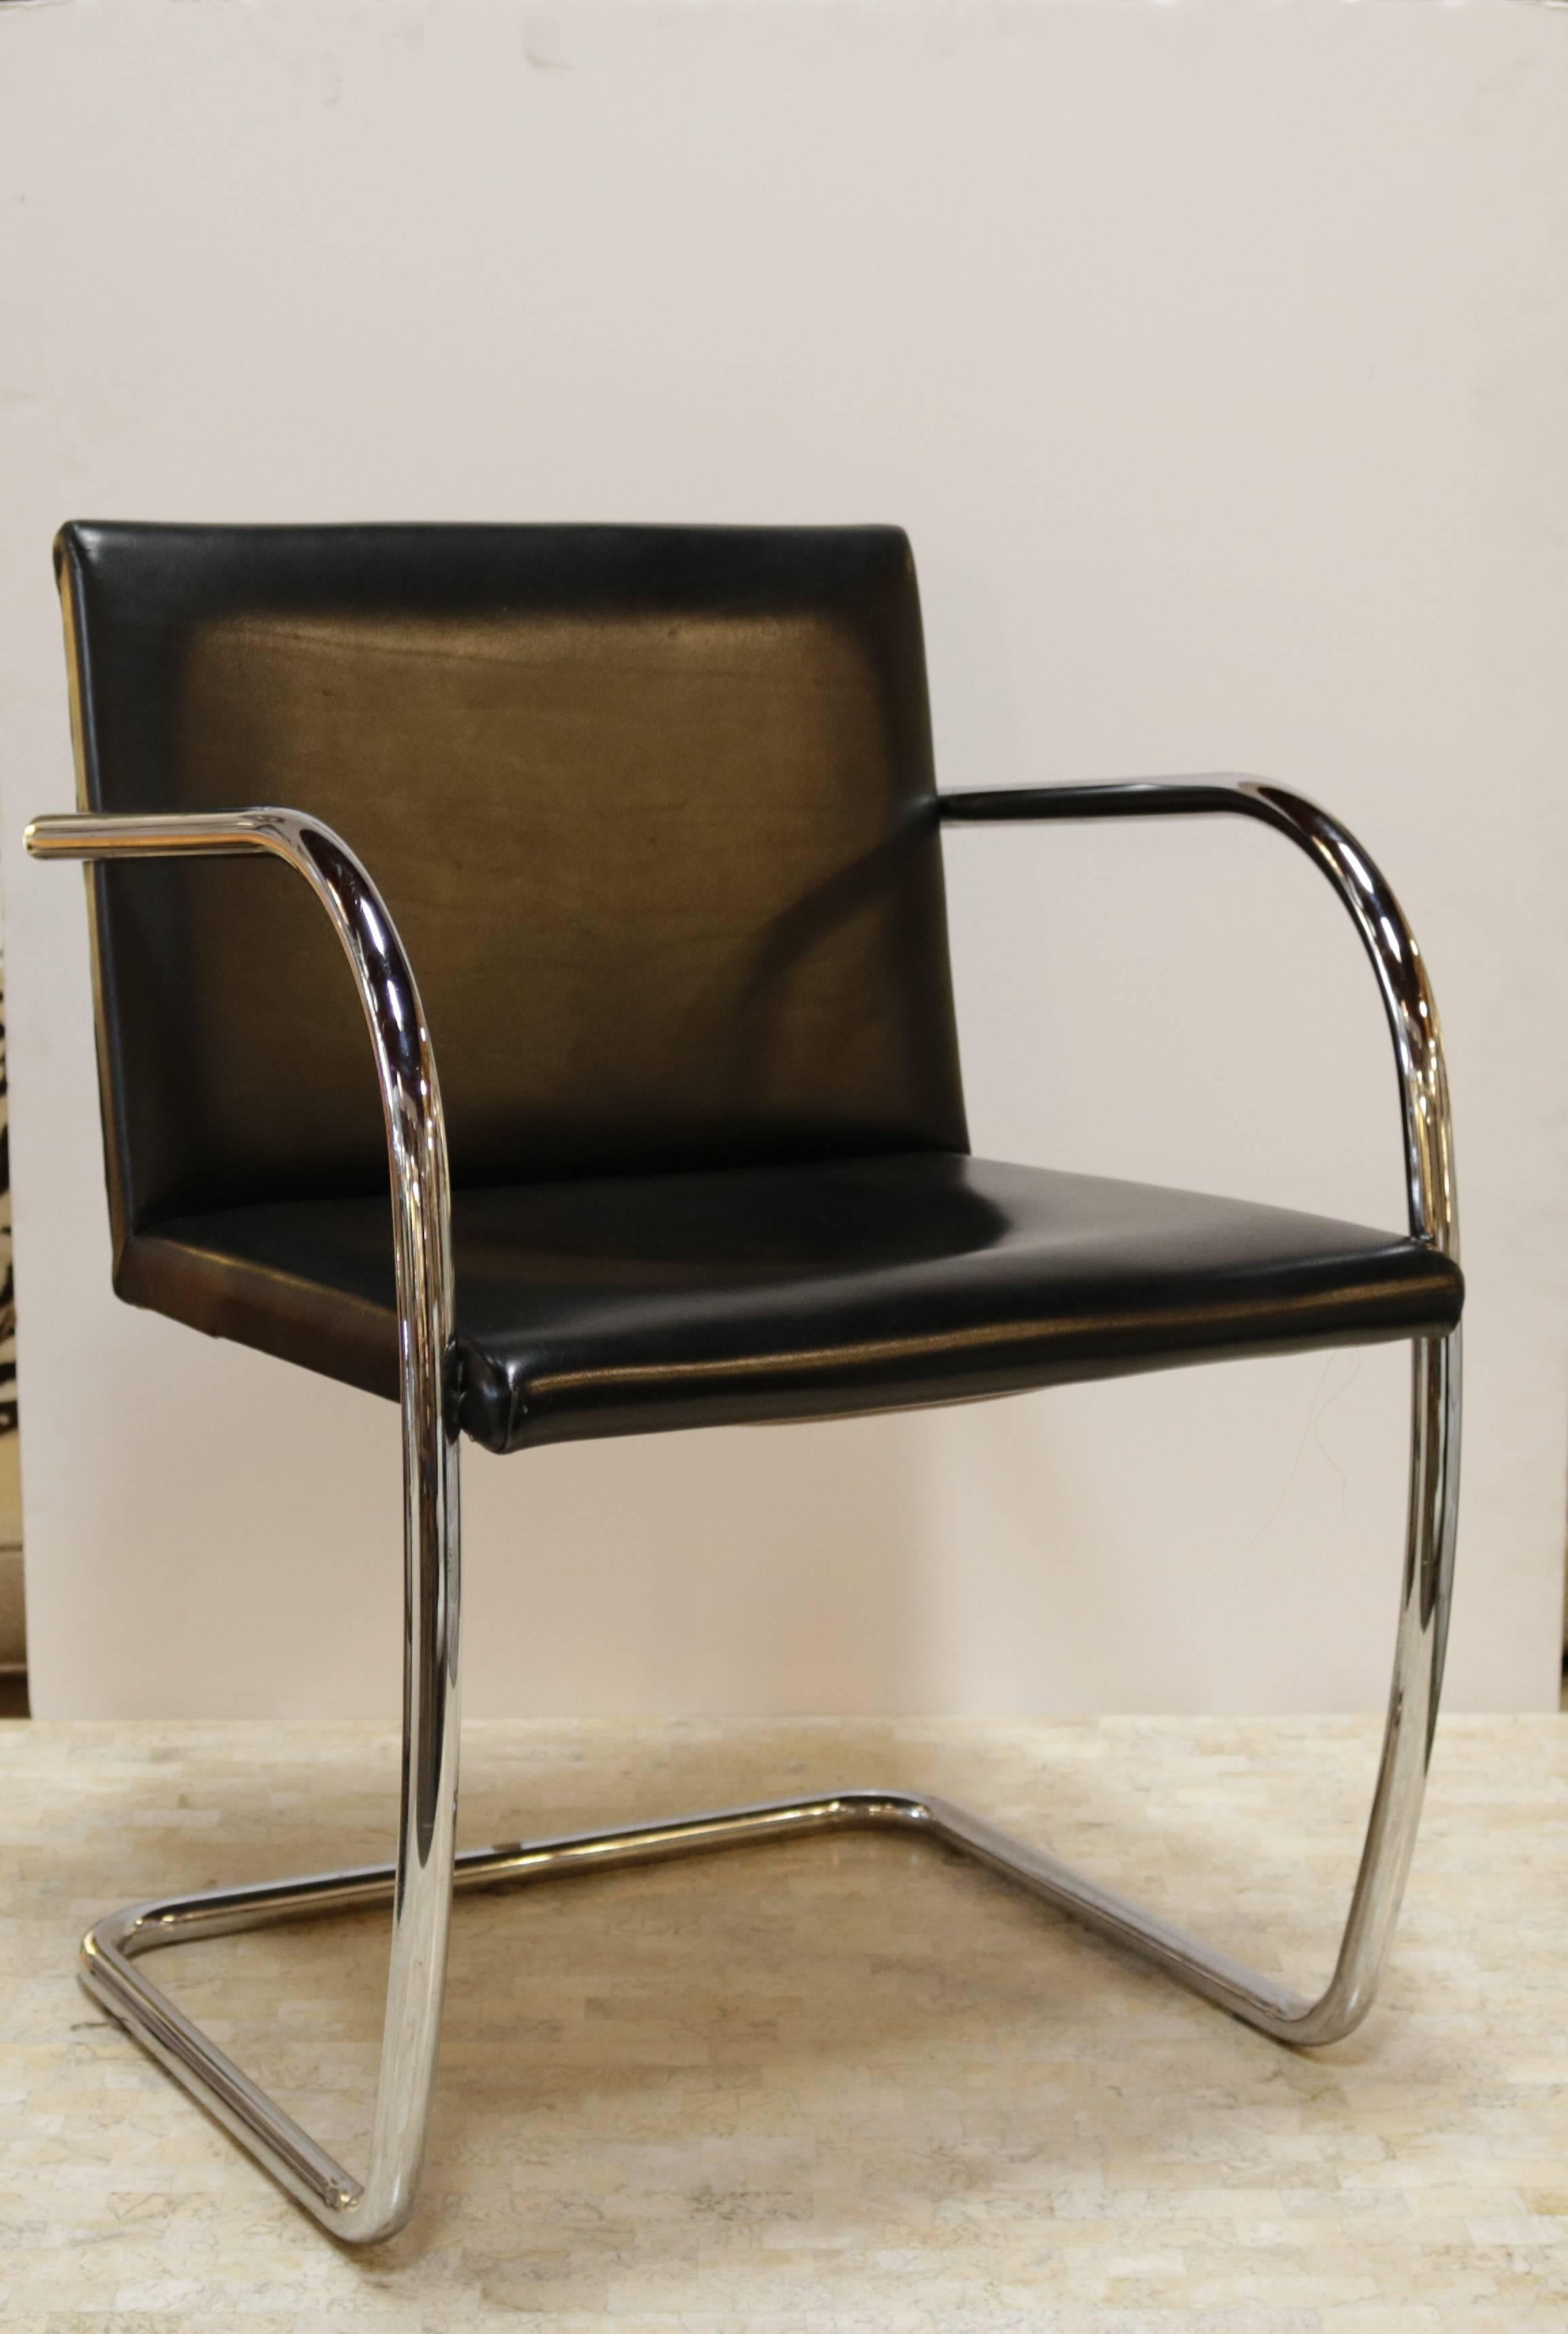 Pair of Classic Brno chairs by German-American architect and designer Ludwig Mies van der Rohe. Often referred to by just his sur name, the designer made his career in the United States and is considered one of the fathers of Modernism. The